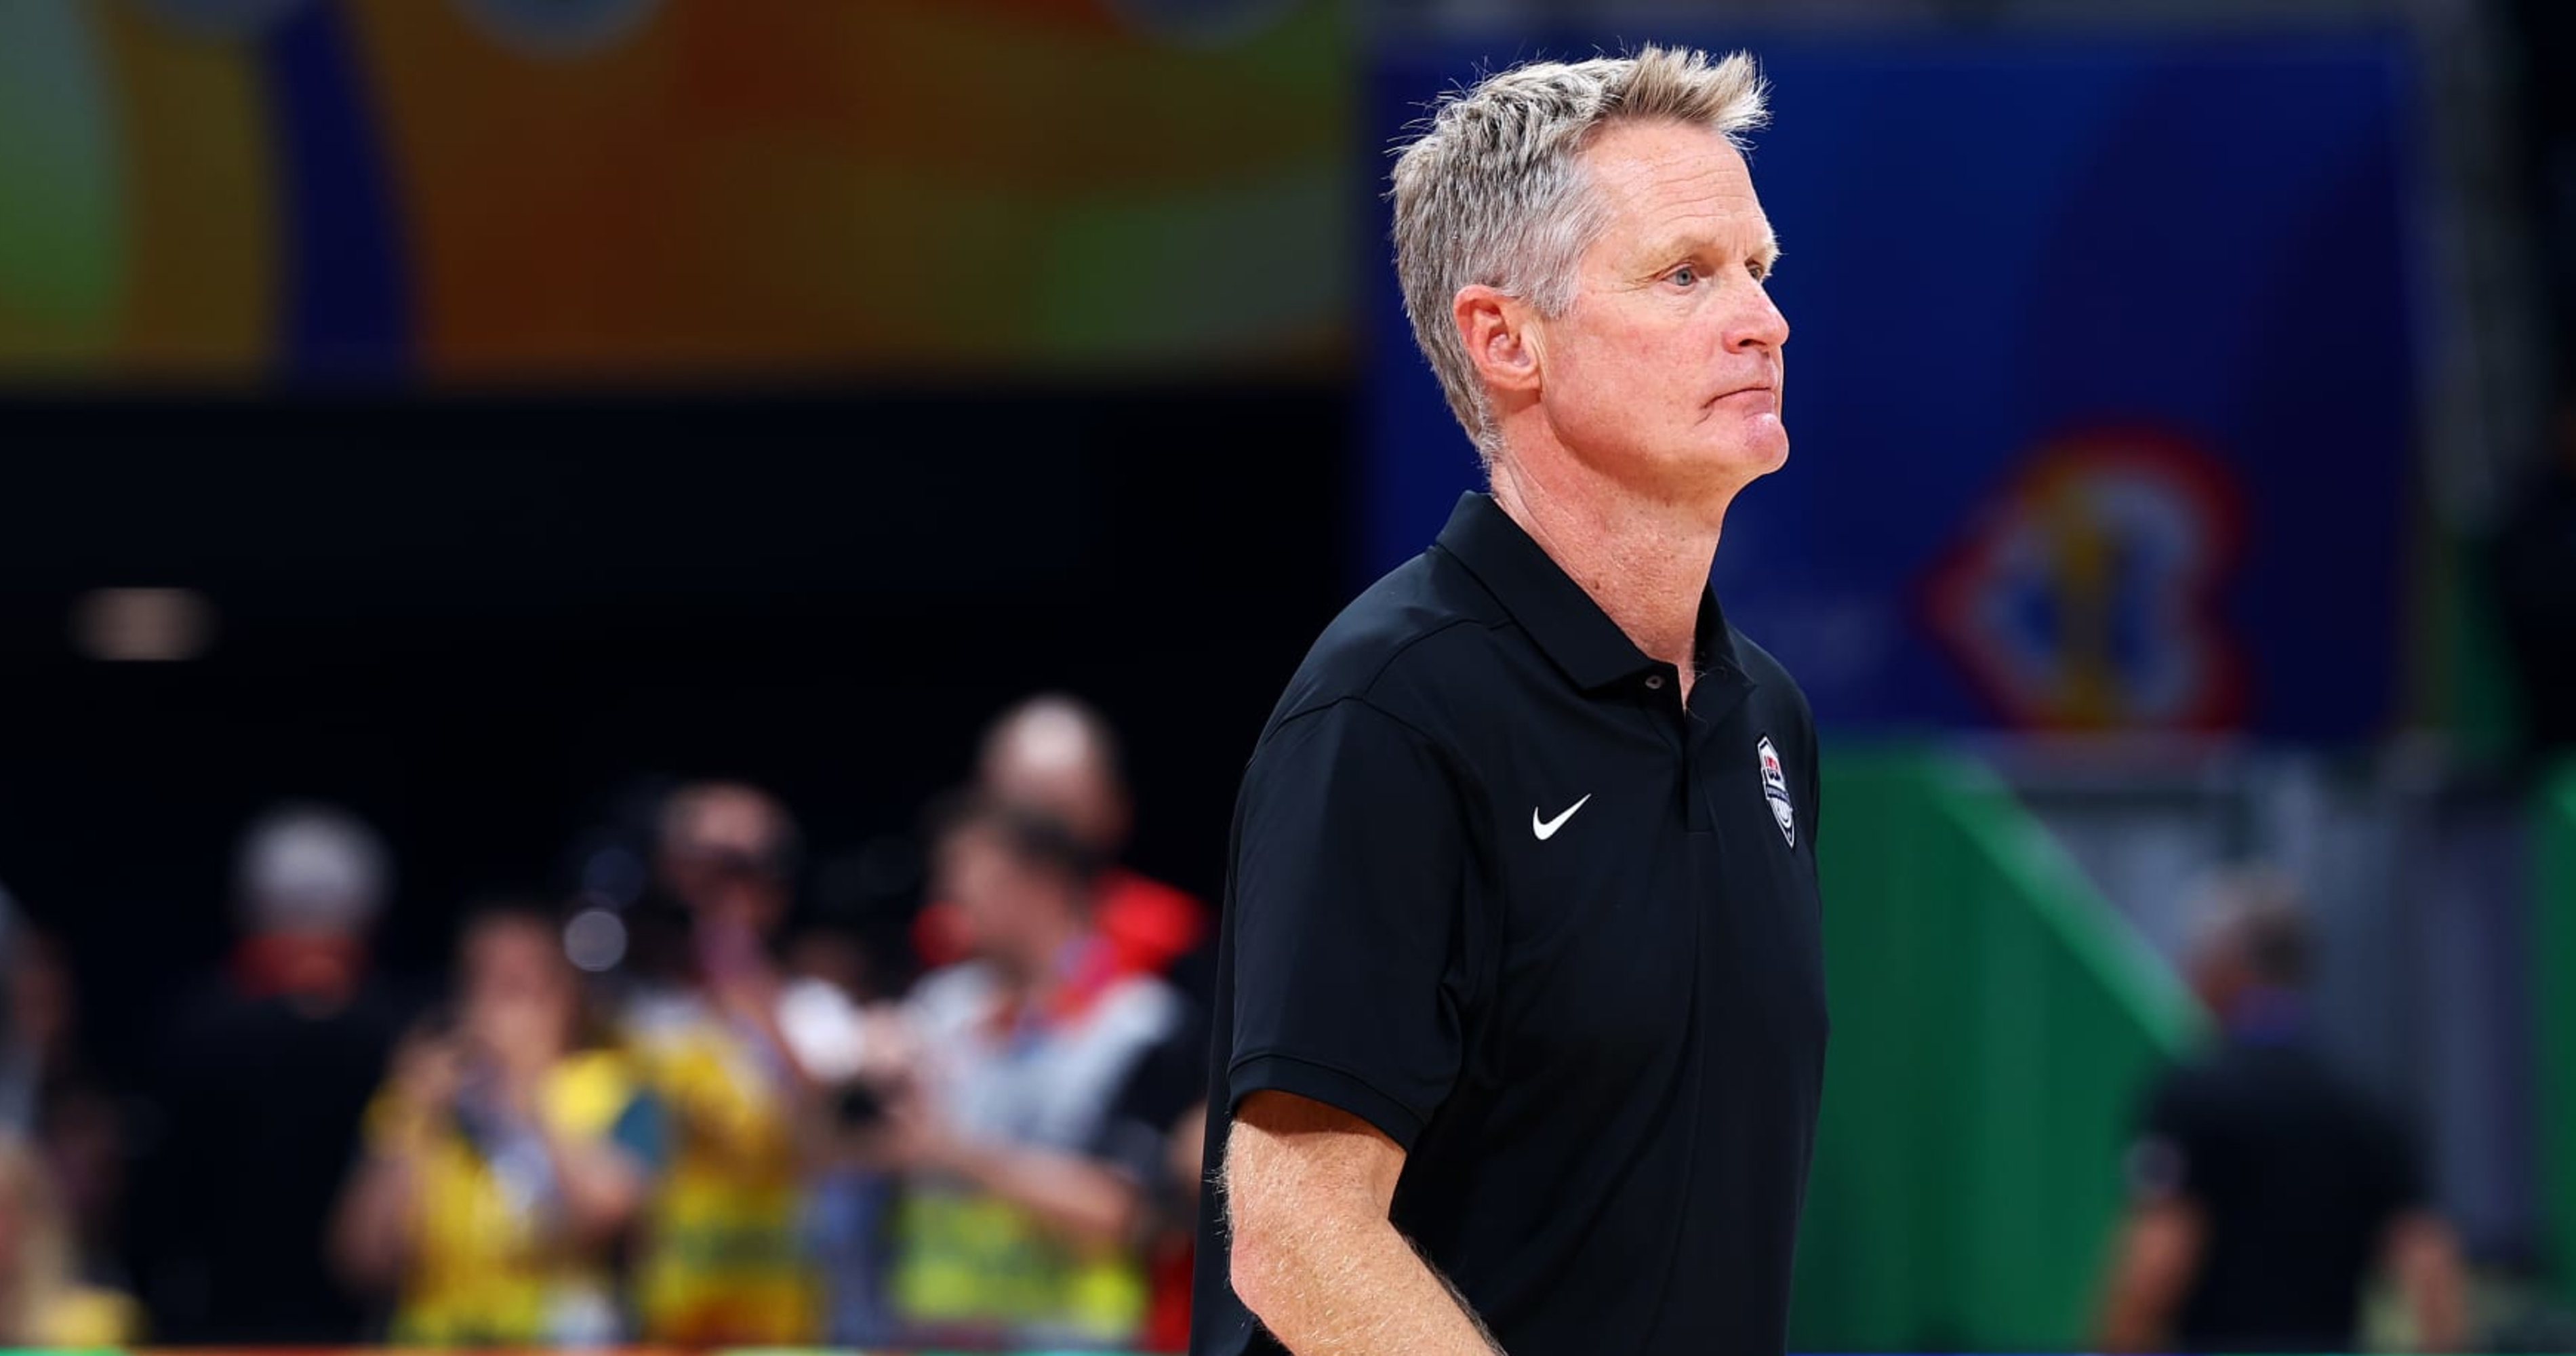 Steve Kerr Feels 'Bad' for USA Players After Canada Loss: 'Hard to Build Continuity'